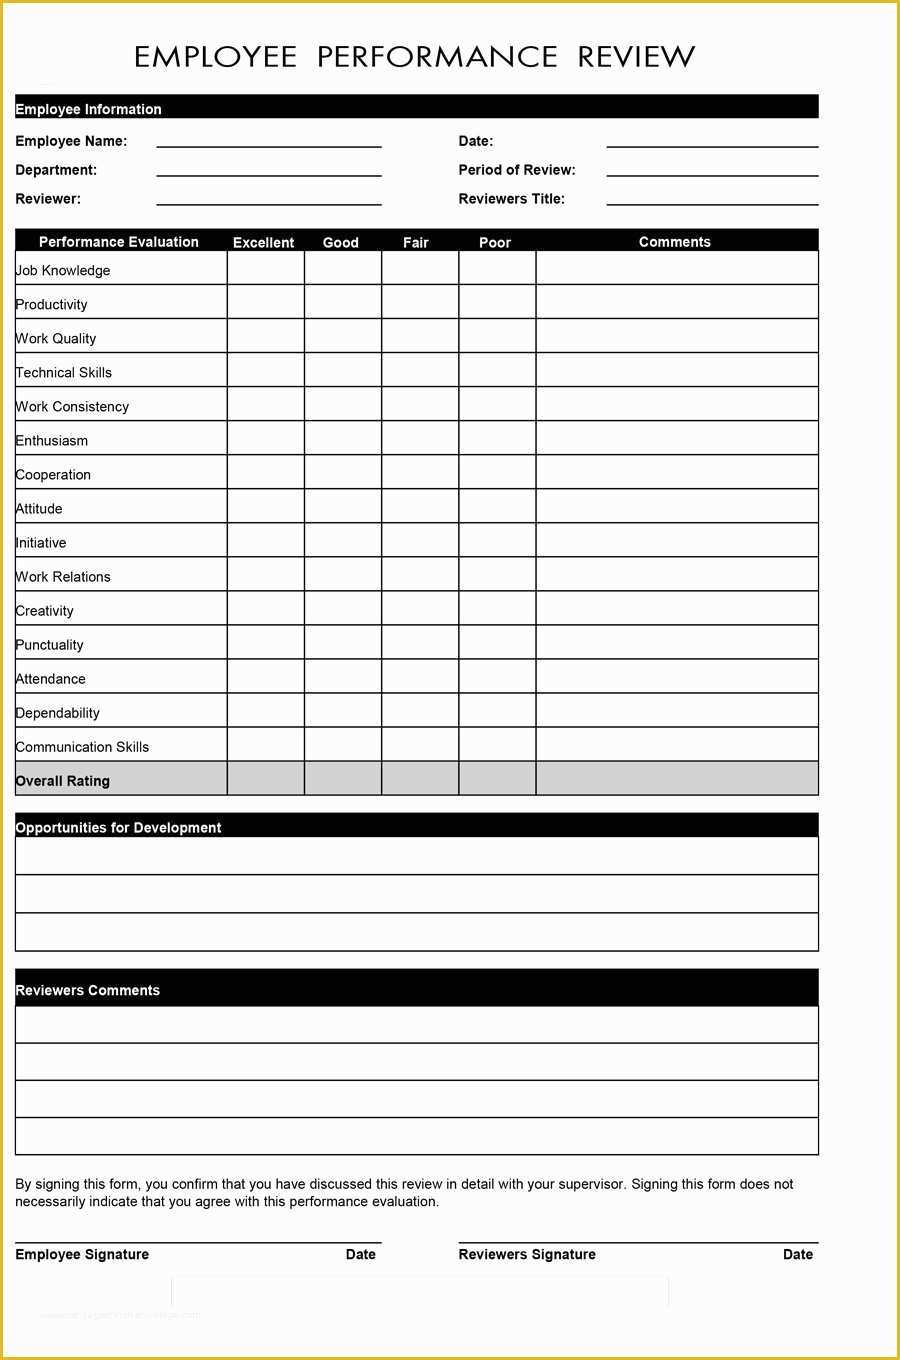 Employee Review form Template Free Of 46 Employee Evaluation forms & Performance Review Examples